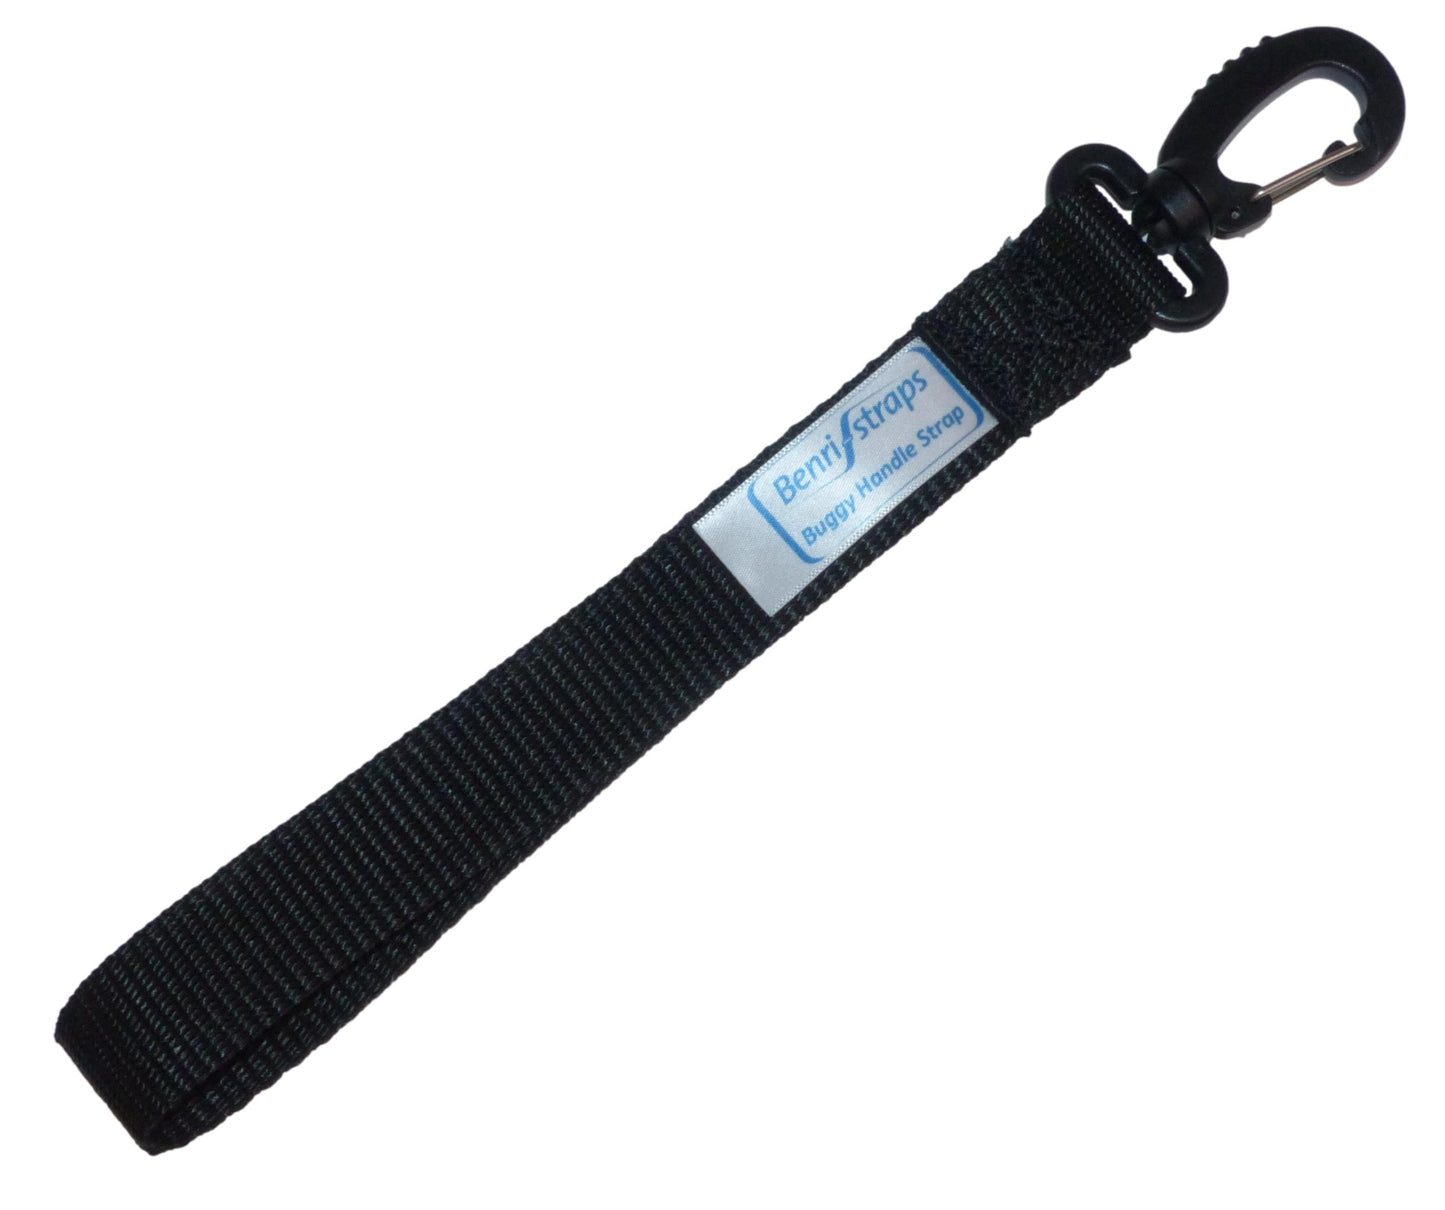 Benristraps 25mm Buggy Handle Carry Strap in black